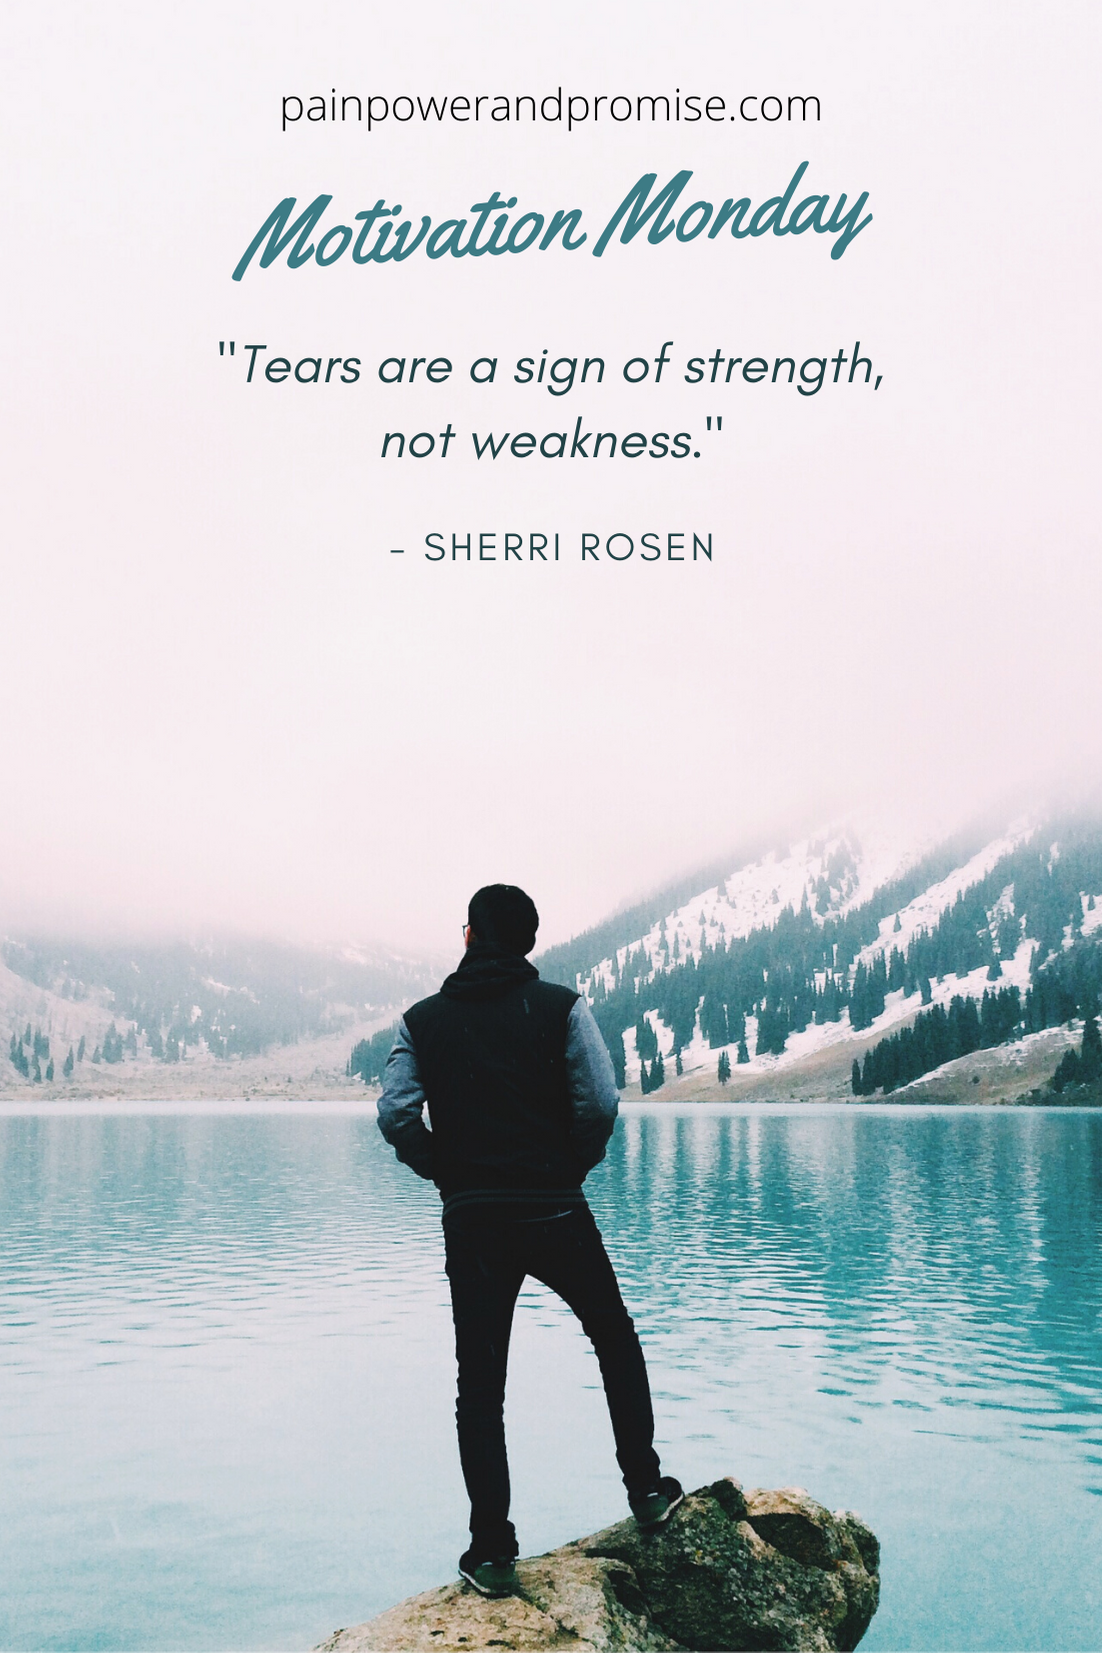 Tears are a sign of strength, not weakness.